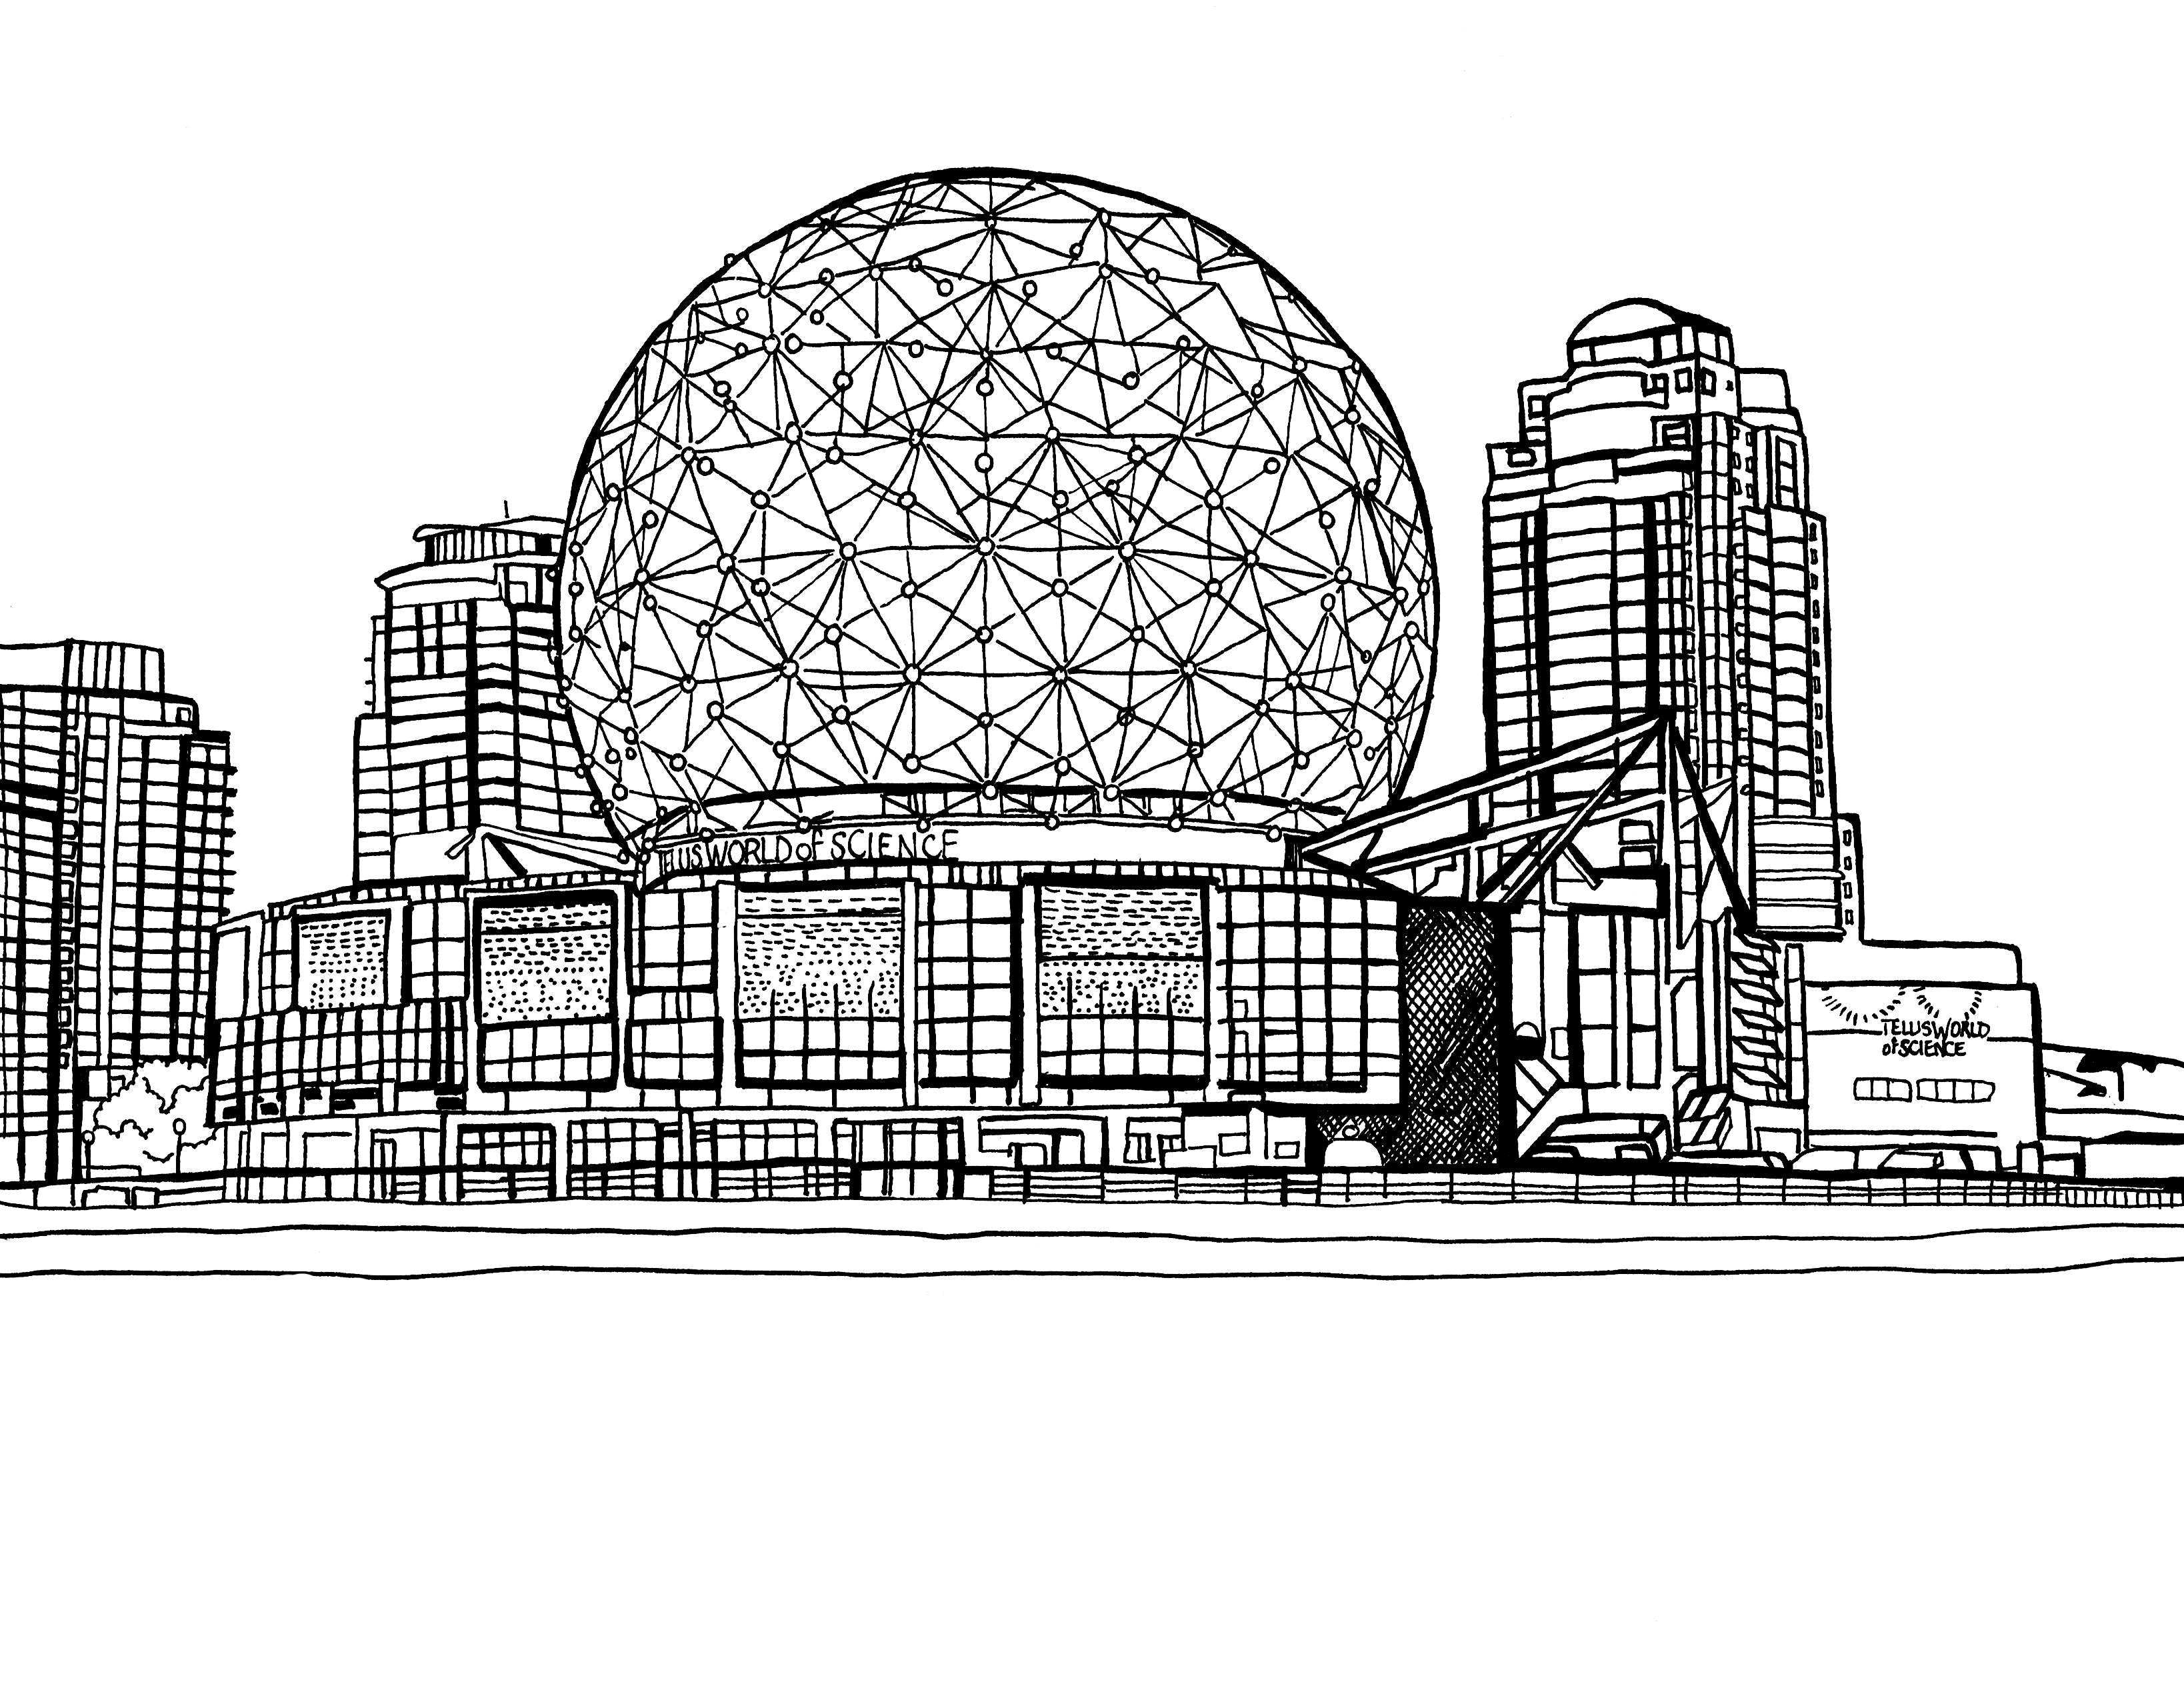 A YouColor creation by Nancy Béliveau, this free coloring page showcases the iconic geodesic dome of Science World in Vancouver, Canada. The illustration details the distinctive structure and its surrounding urban landscape, under a sky filled with stars, inviting colorists to infuse the scene with hues that reflect the vibrant educational spirit of this landmark. Perfect for those who appreciate the fusion of art, science, and creativity. Free coloring page :: You-Color